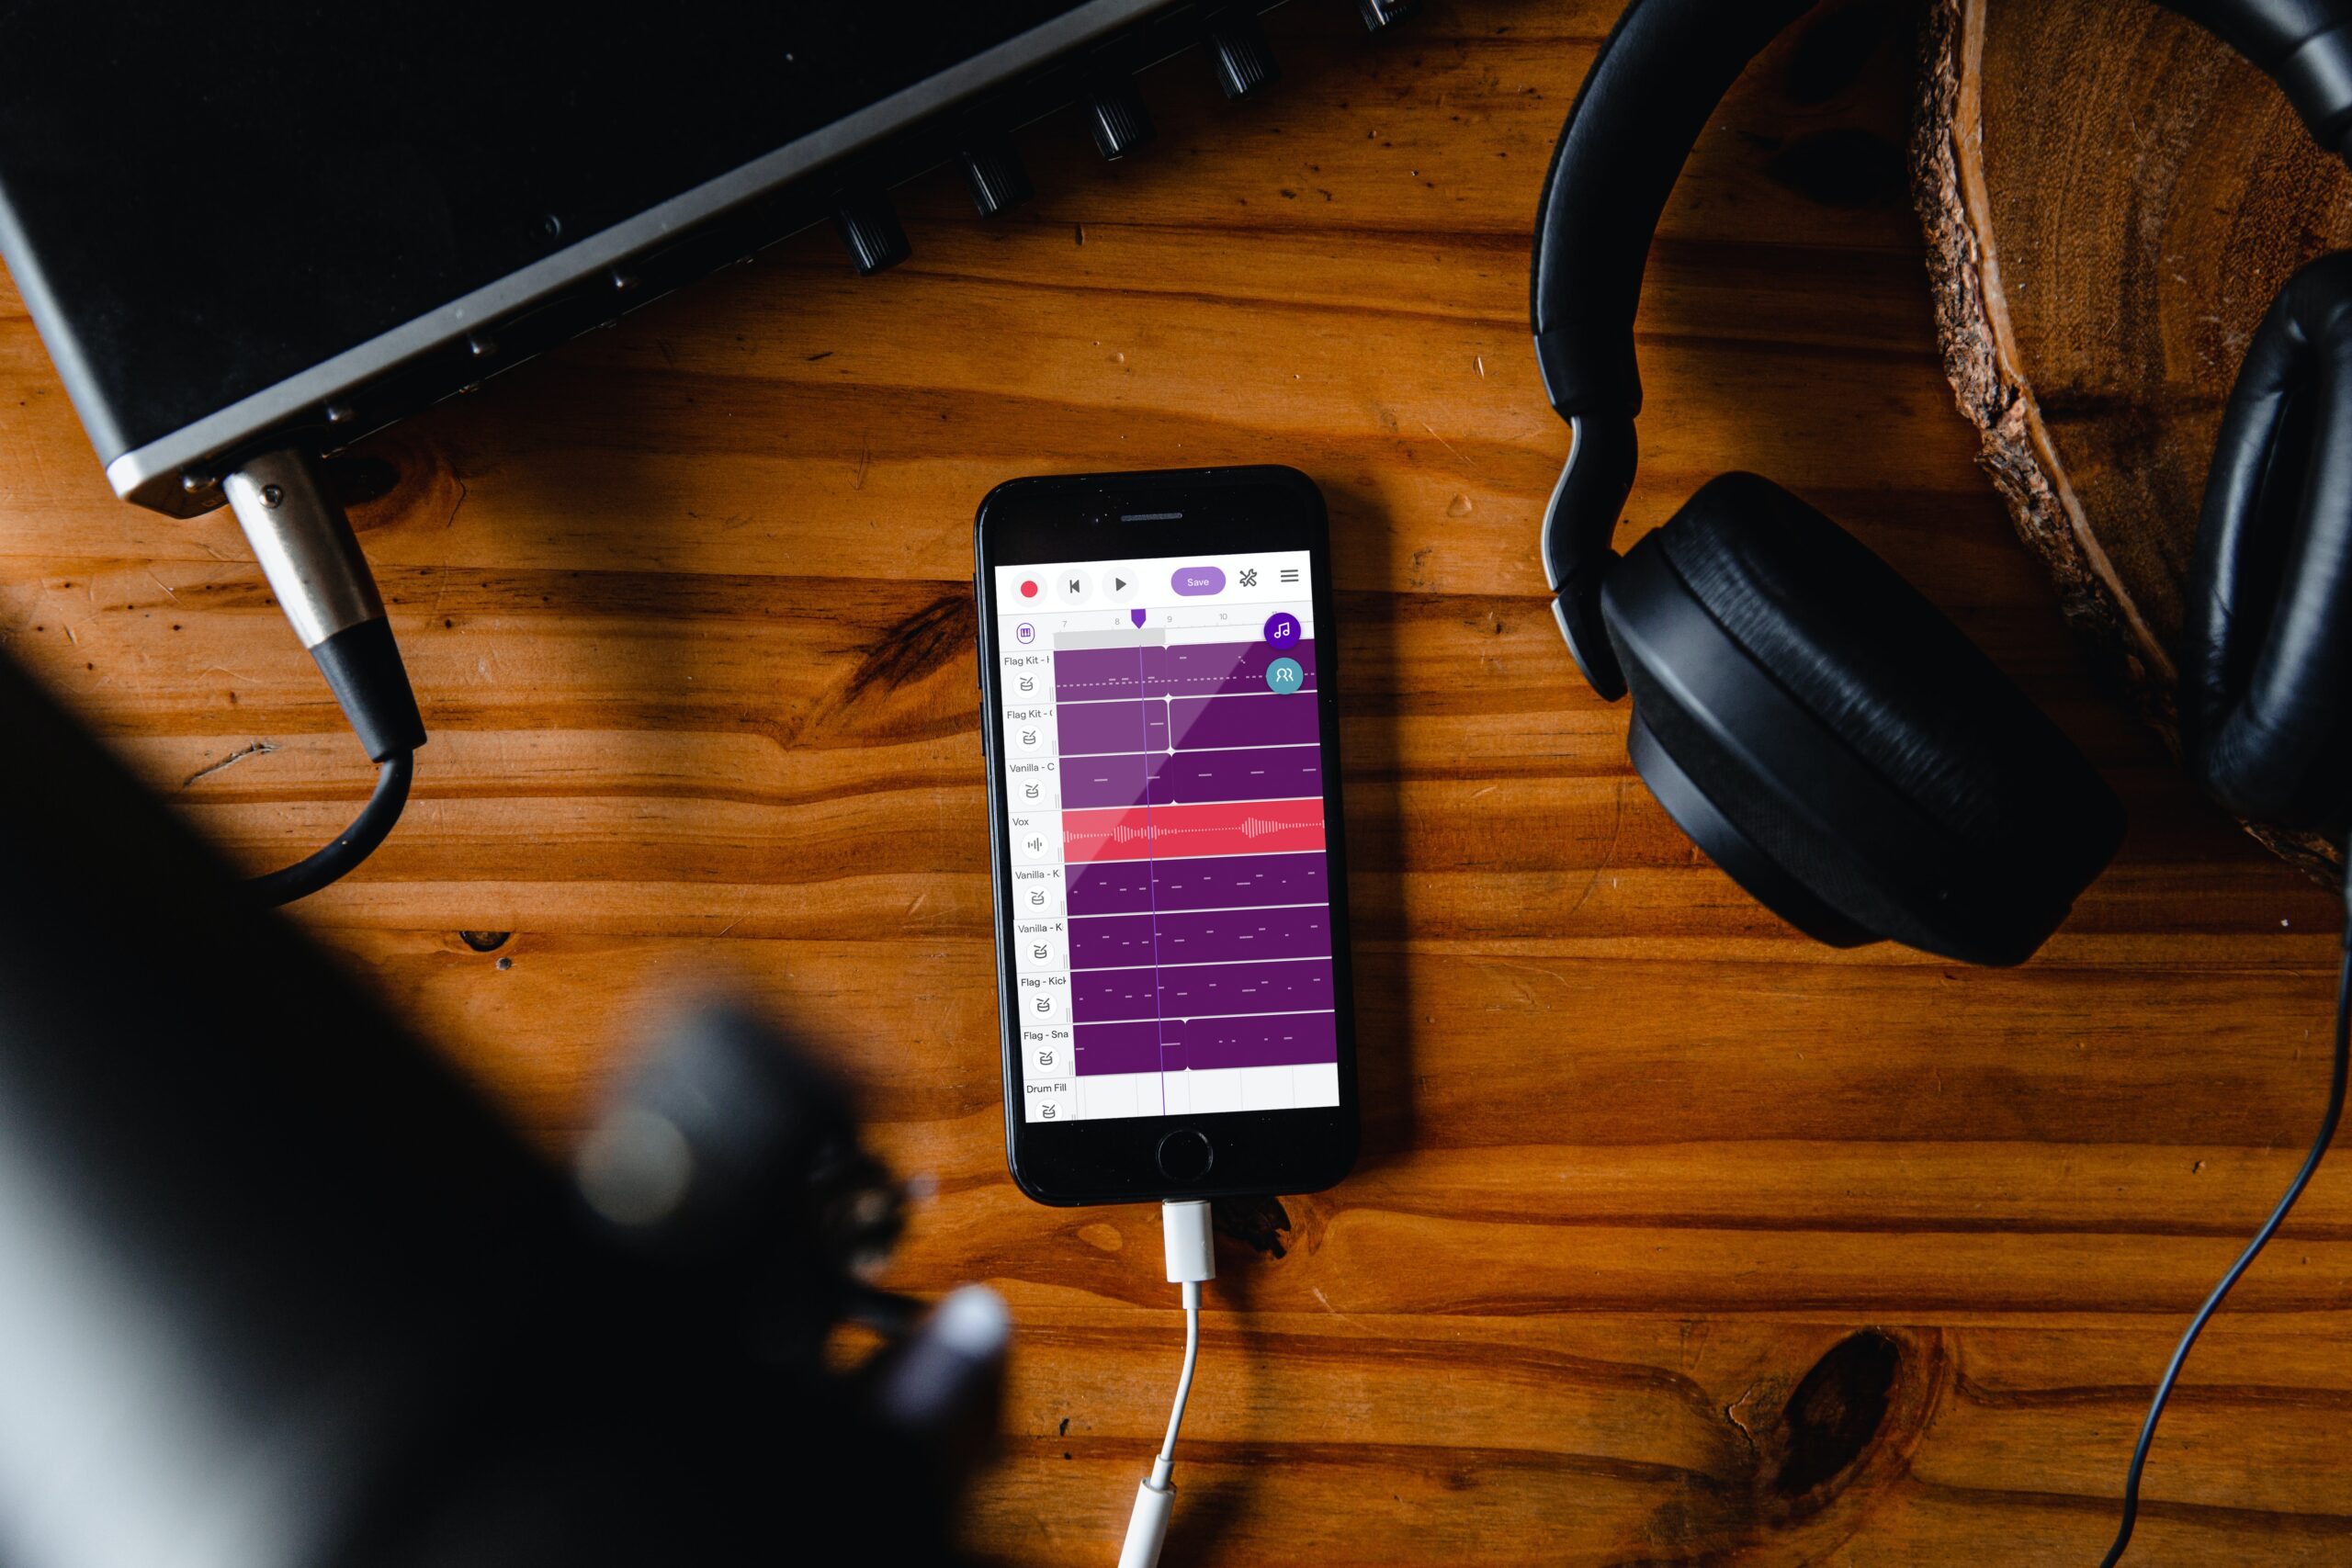 Mobile recording rig with an iphone, interface, headphones, and microphones